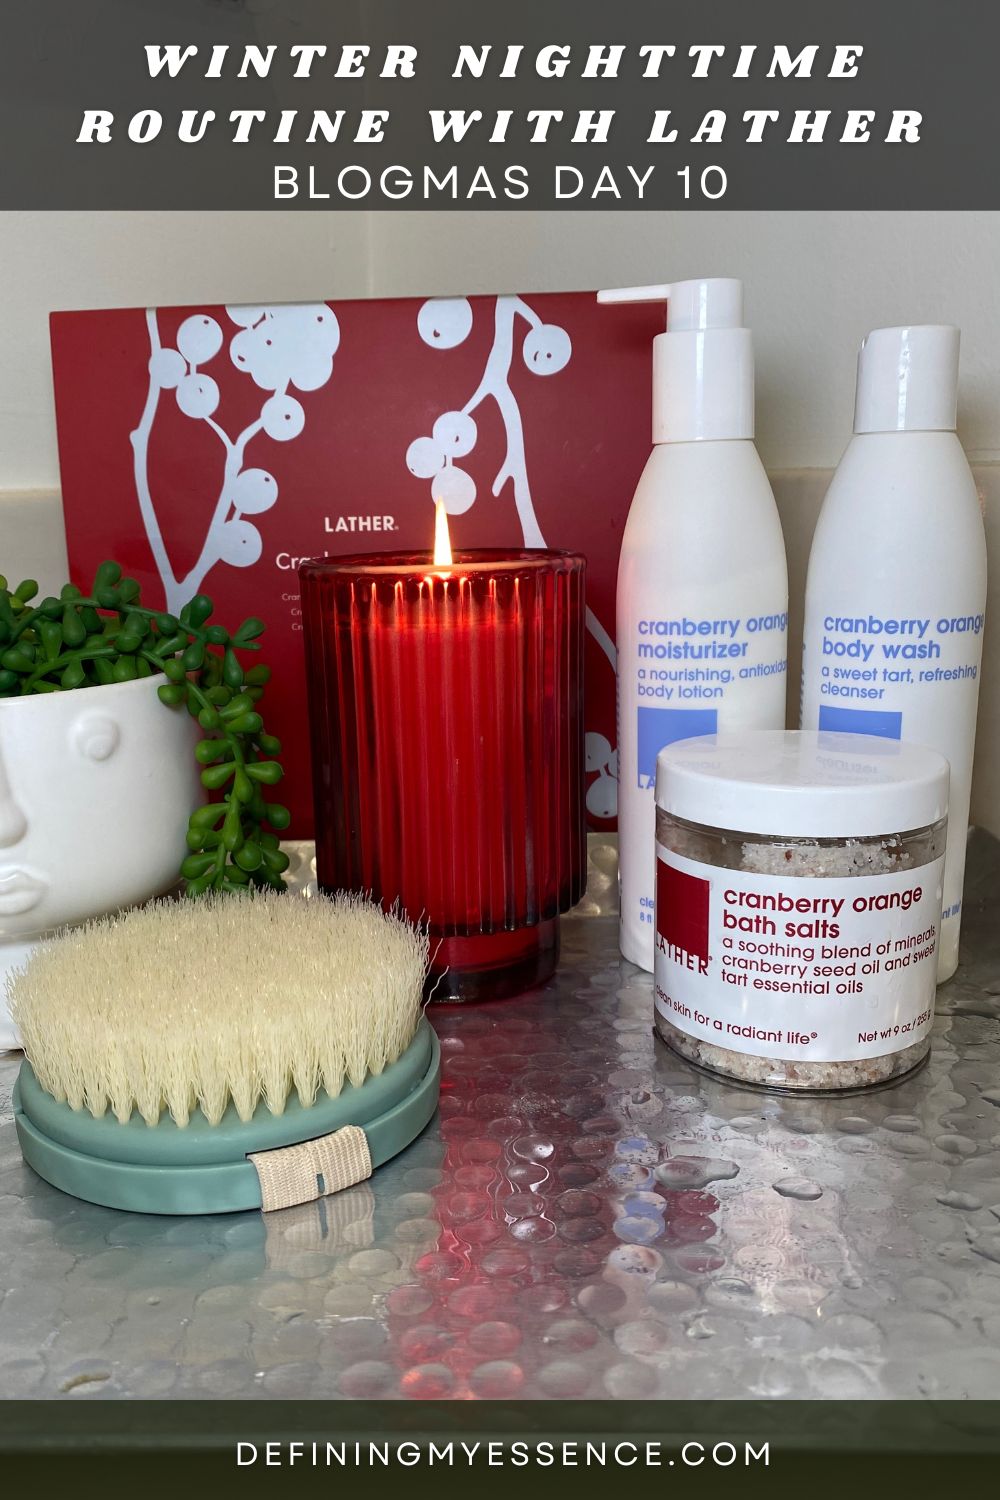 Winter Nighttime Routine With Lather: Blogmas 2023 Day 10